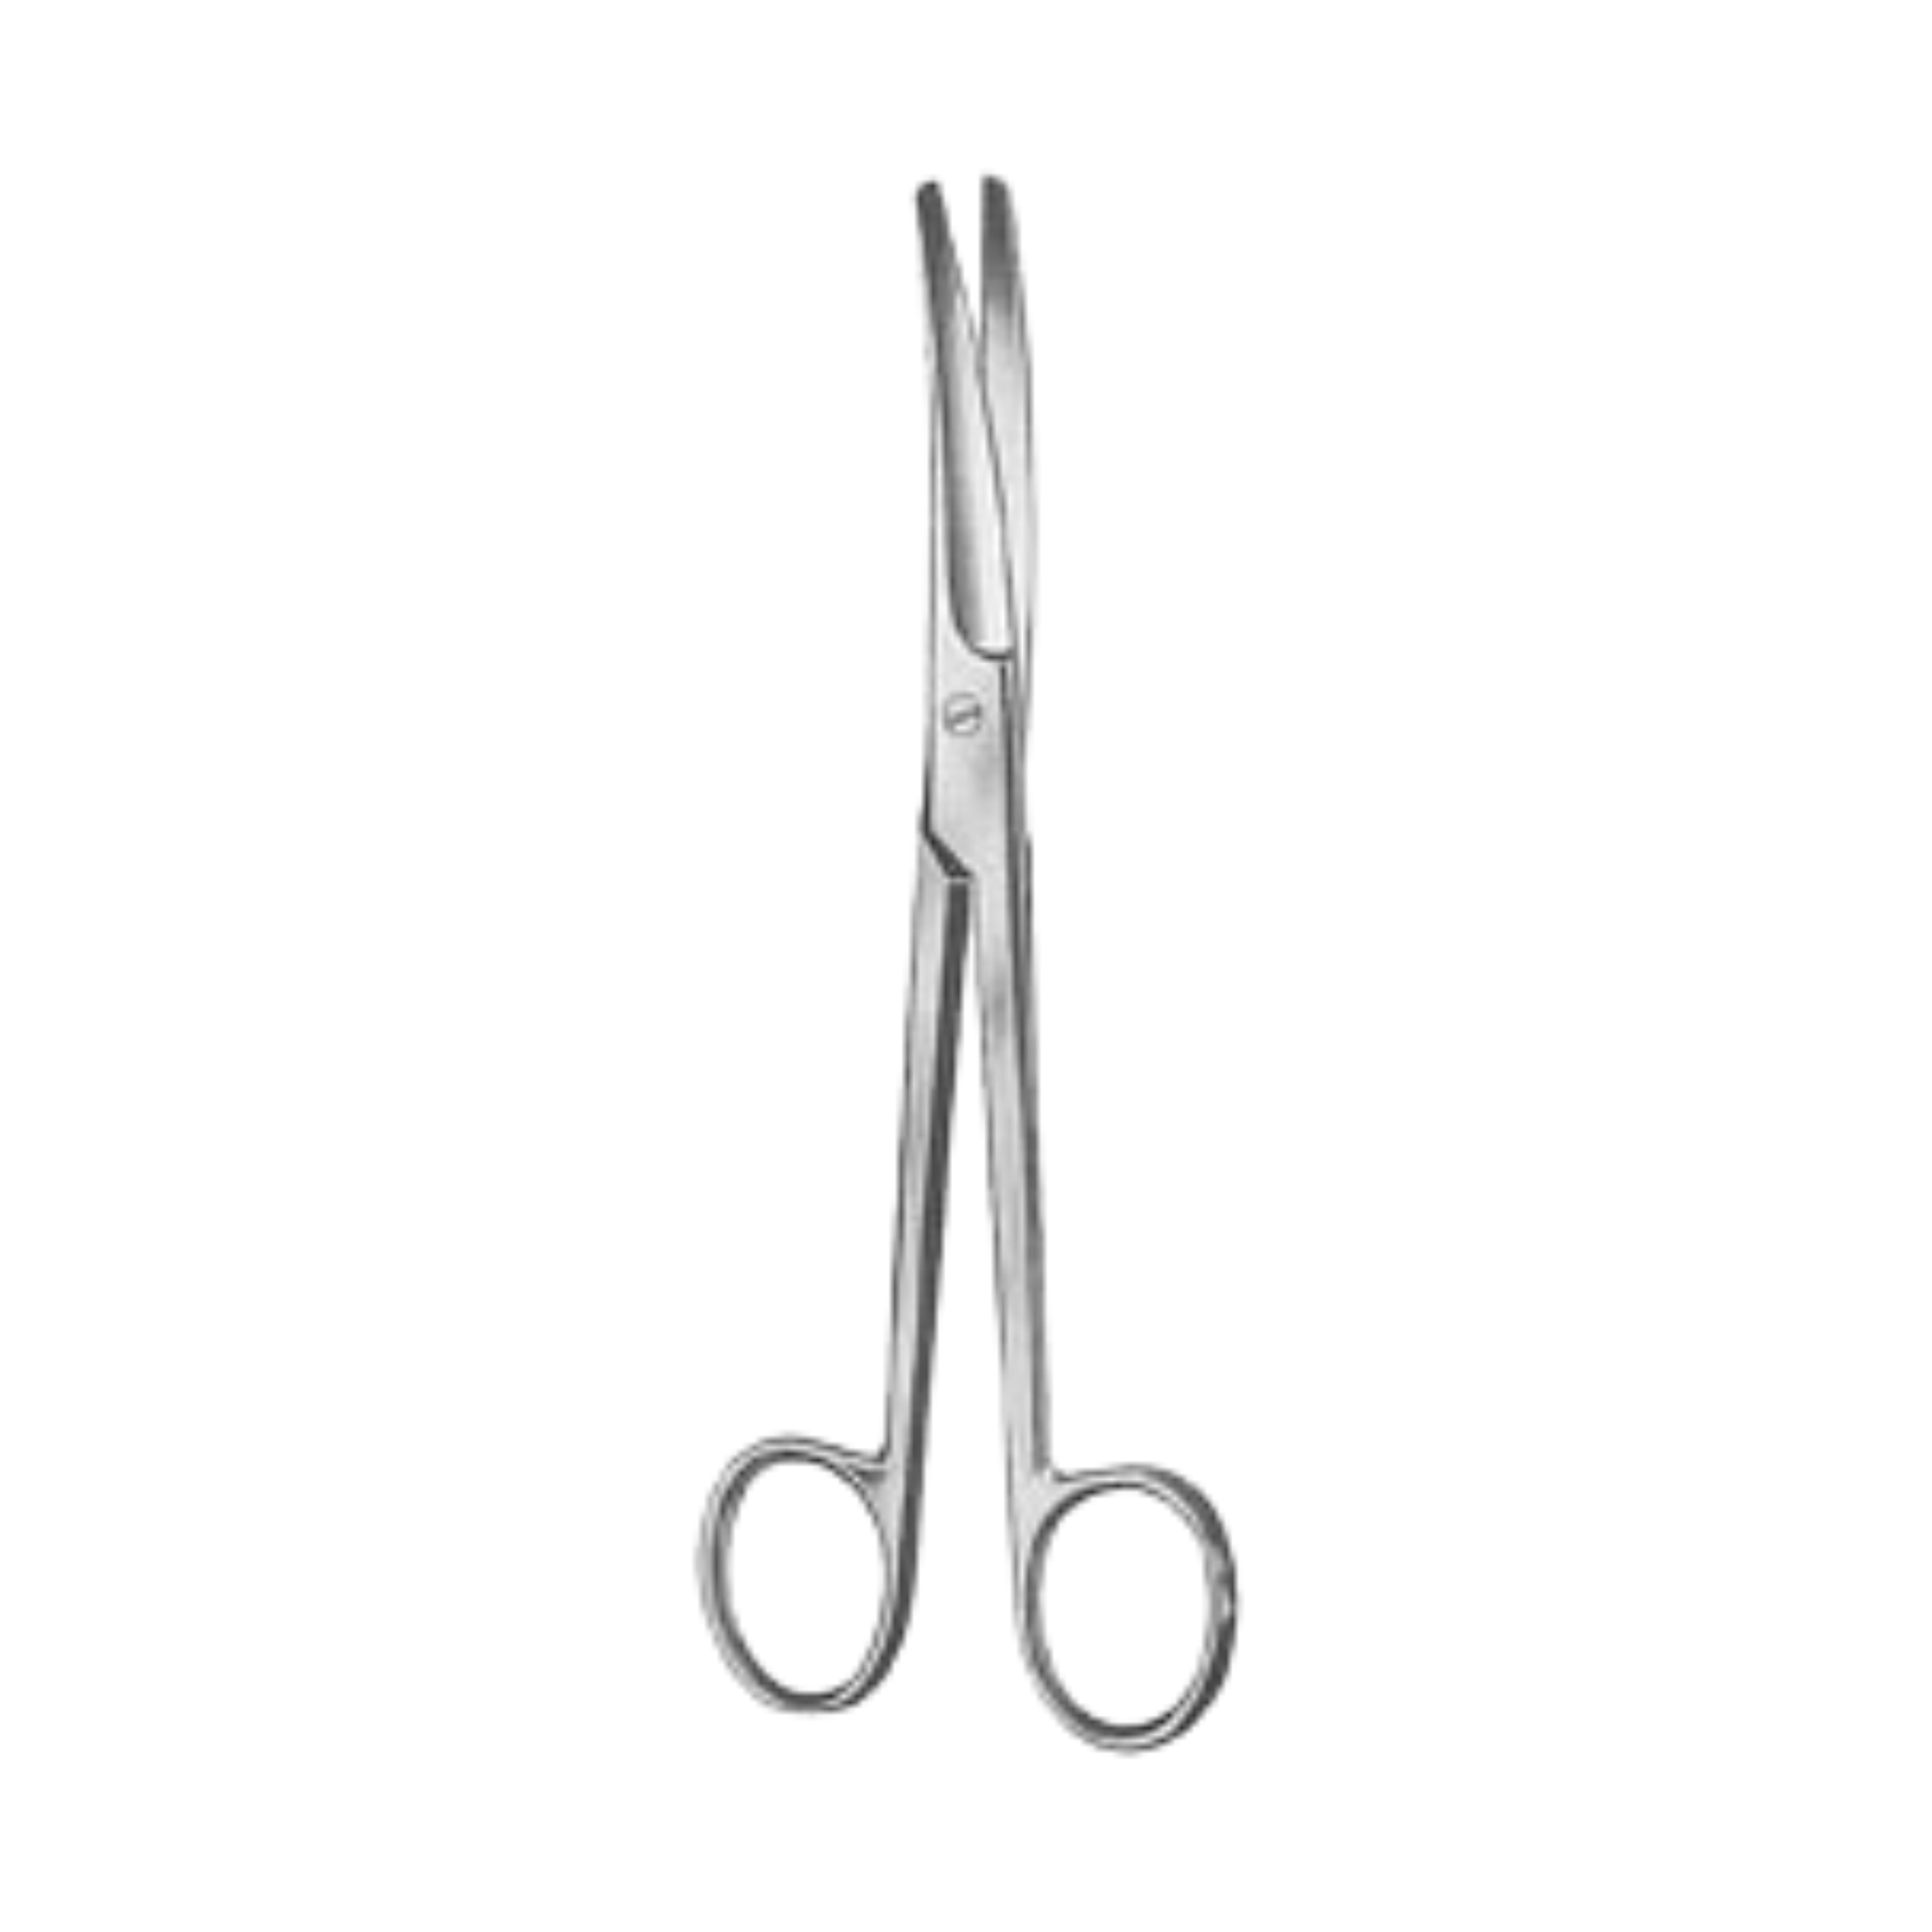 Mayo Operating Scissors- BL/BL, Curved, 17 cm